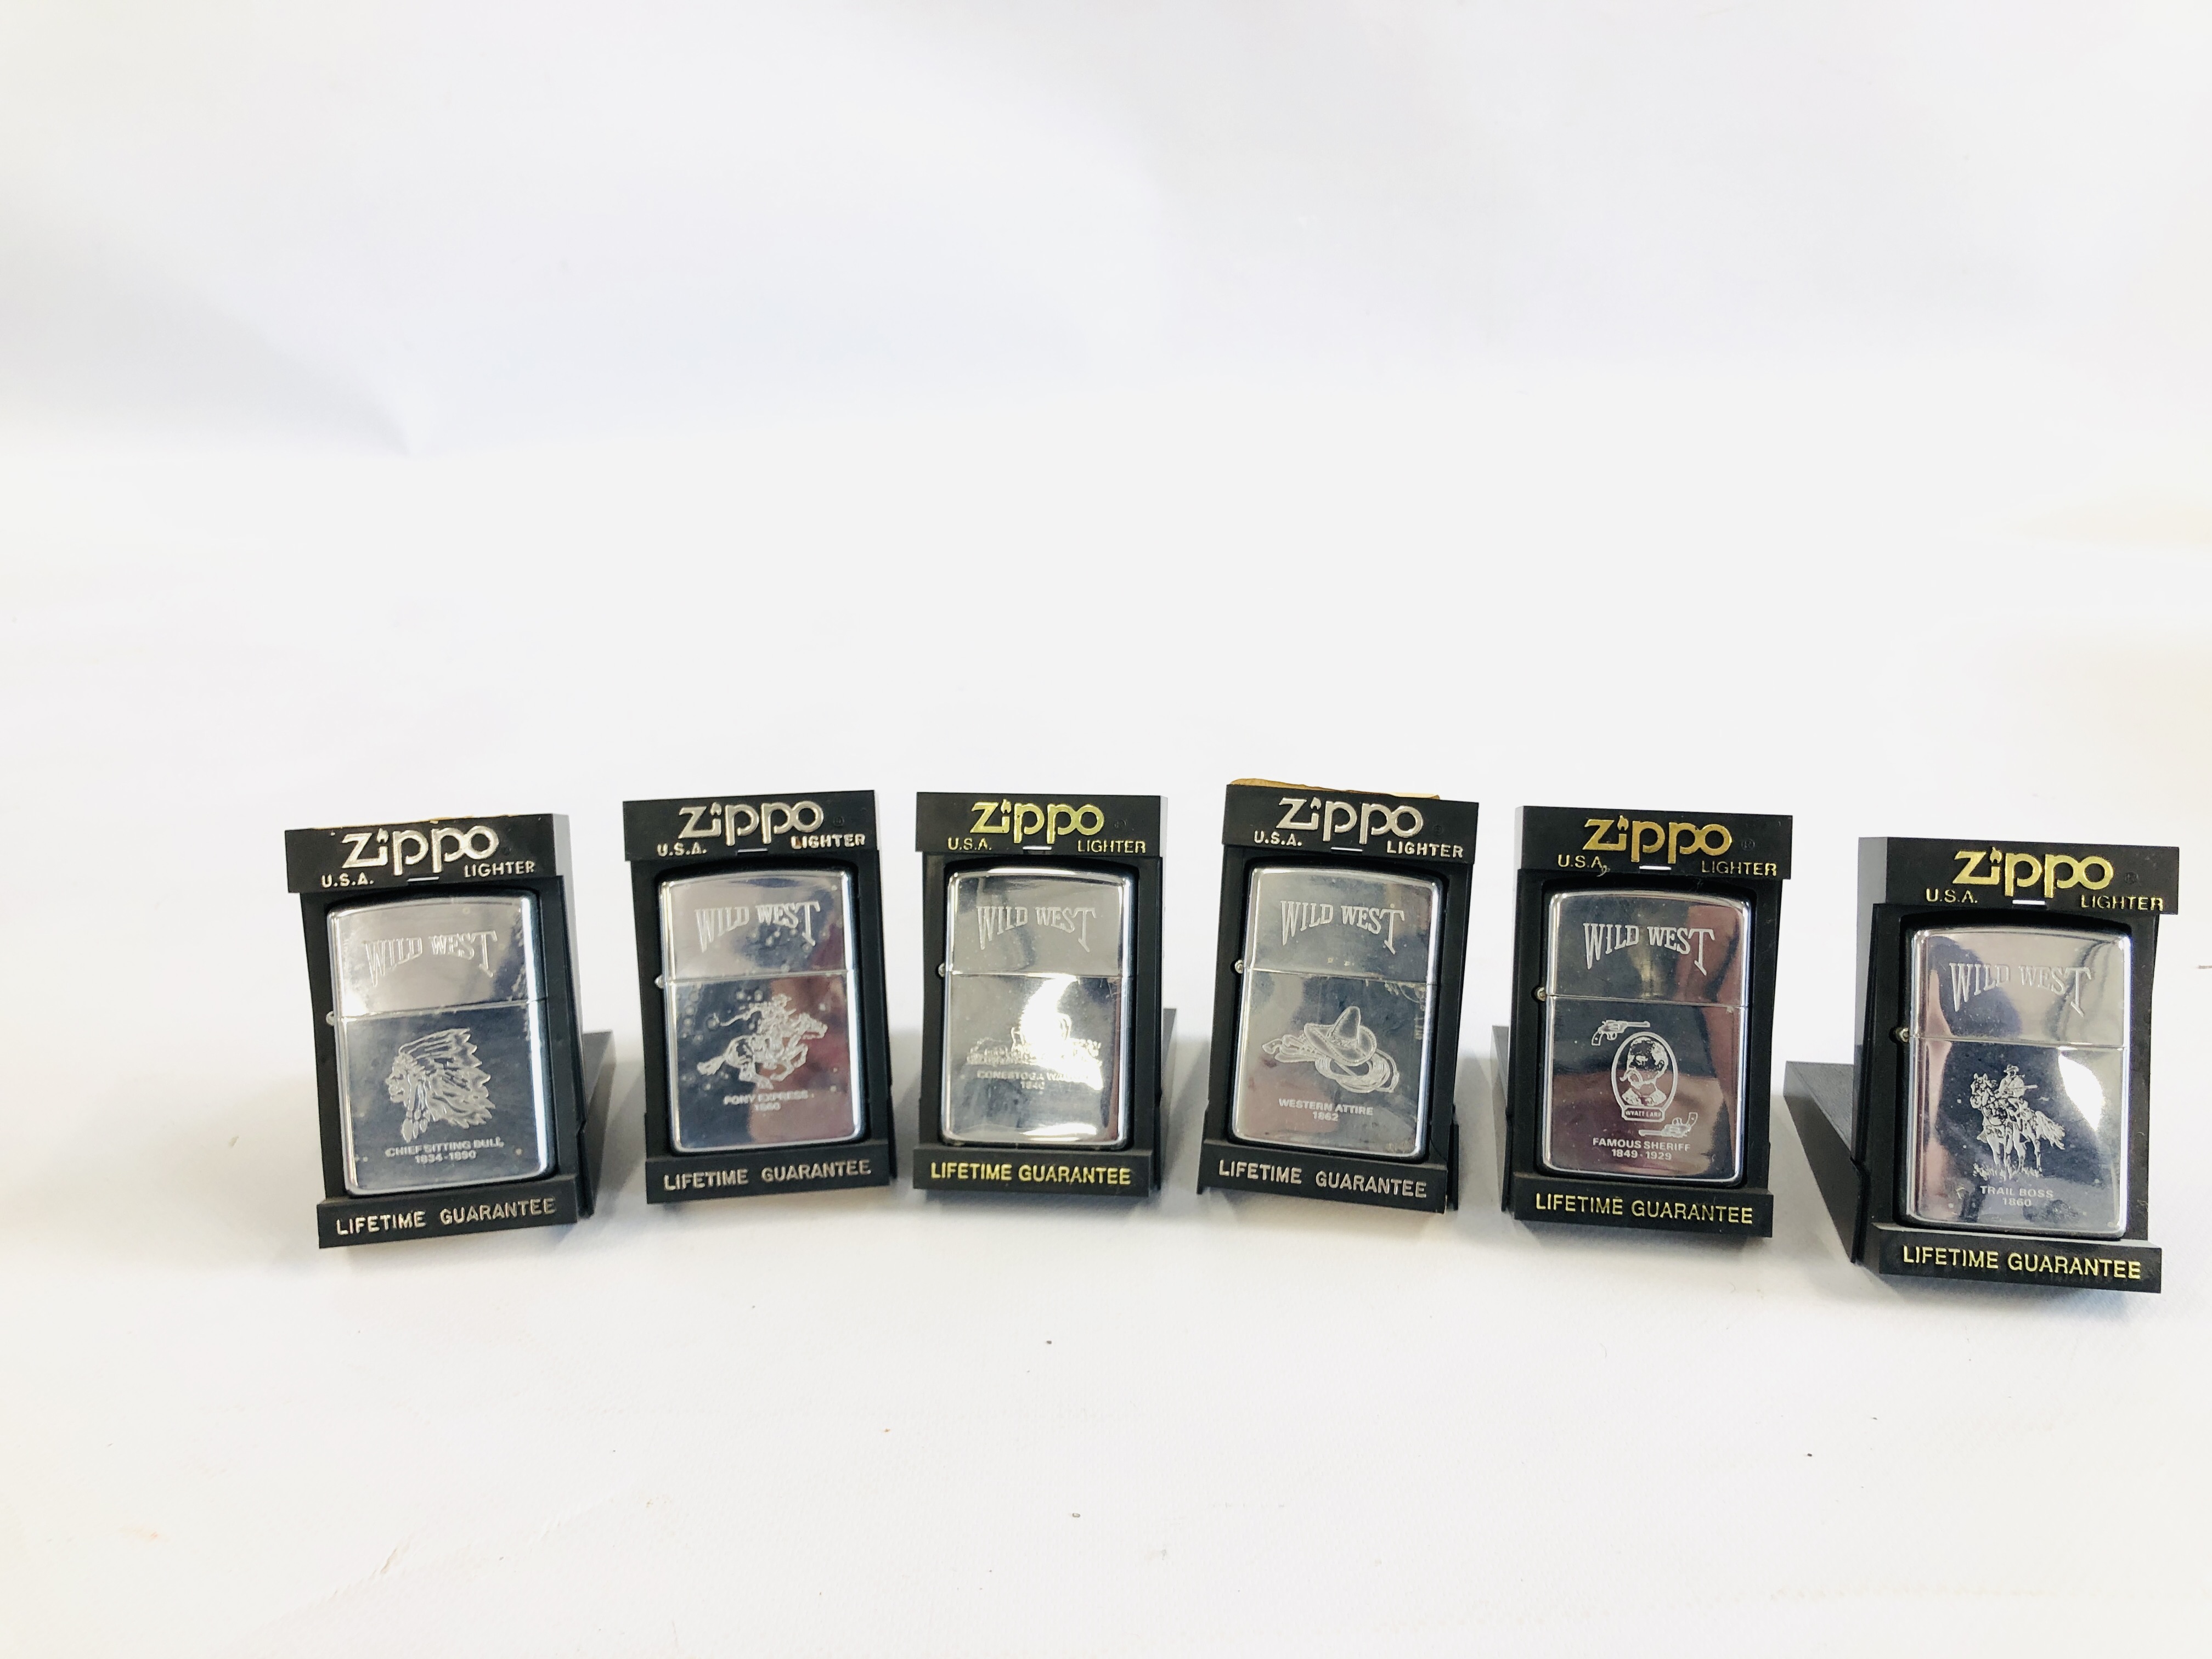 6 X CASED ZIPPO LIGHTERS "WILD WEST" COLLECTION INCLUDING PONY EXPRESS 1860, TRIAL BOSS 1860,